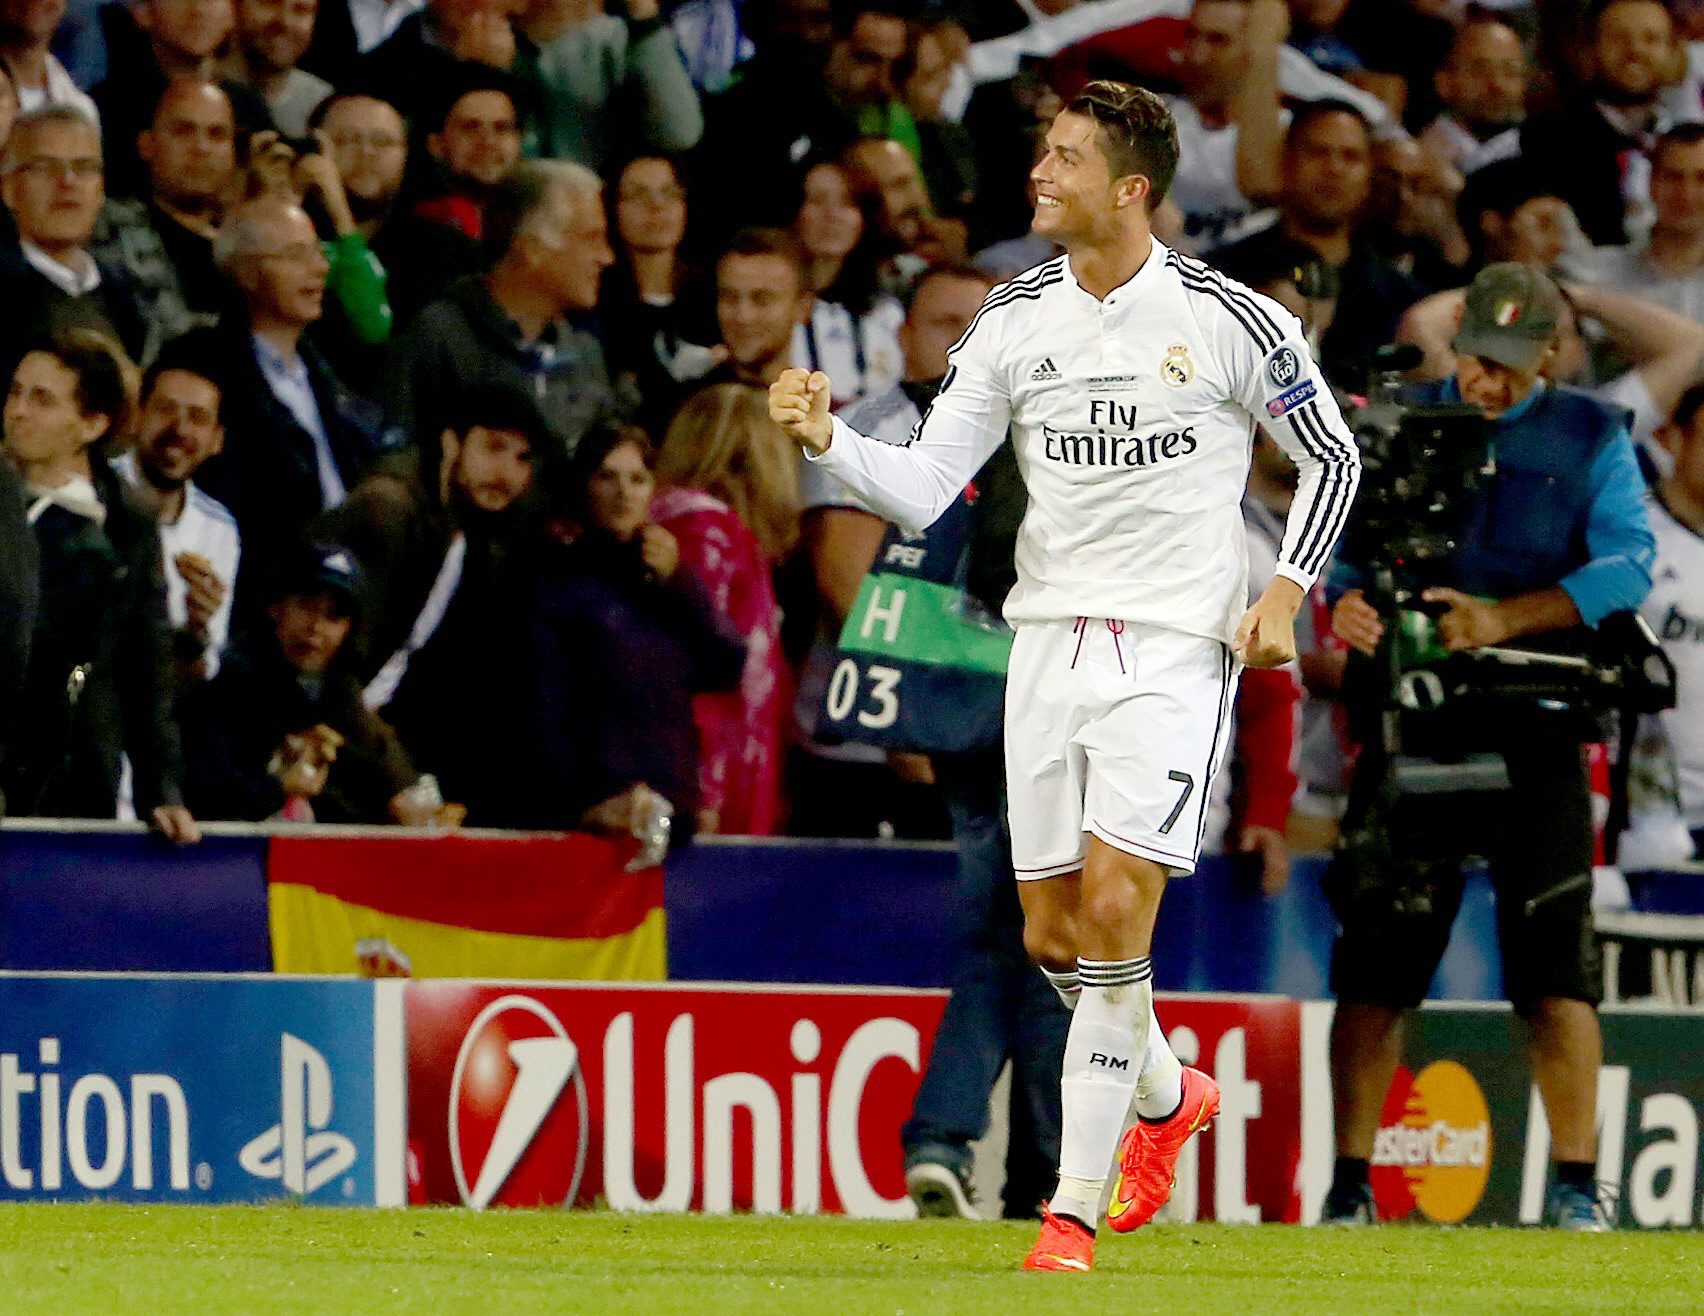 2014-08-12 15:34:06 epa04351003 Christiano Ronaldo of Real Madrid celebrates after scoring his second goal during the UEFA Super Cup match played between Real Madrid CF and Sevilla FC at the Cardiff City Stadium, Cardiff, Great Britain, Tuesday 12 August 2014. EPA/GEOFF CADDICK